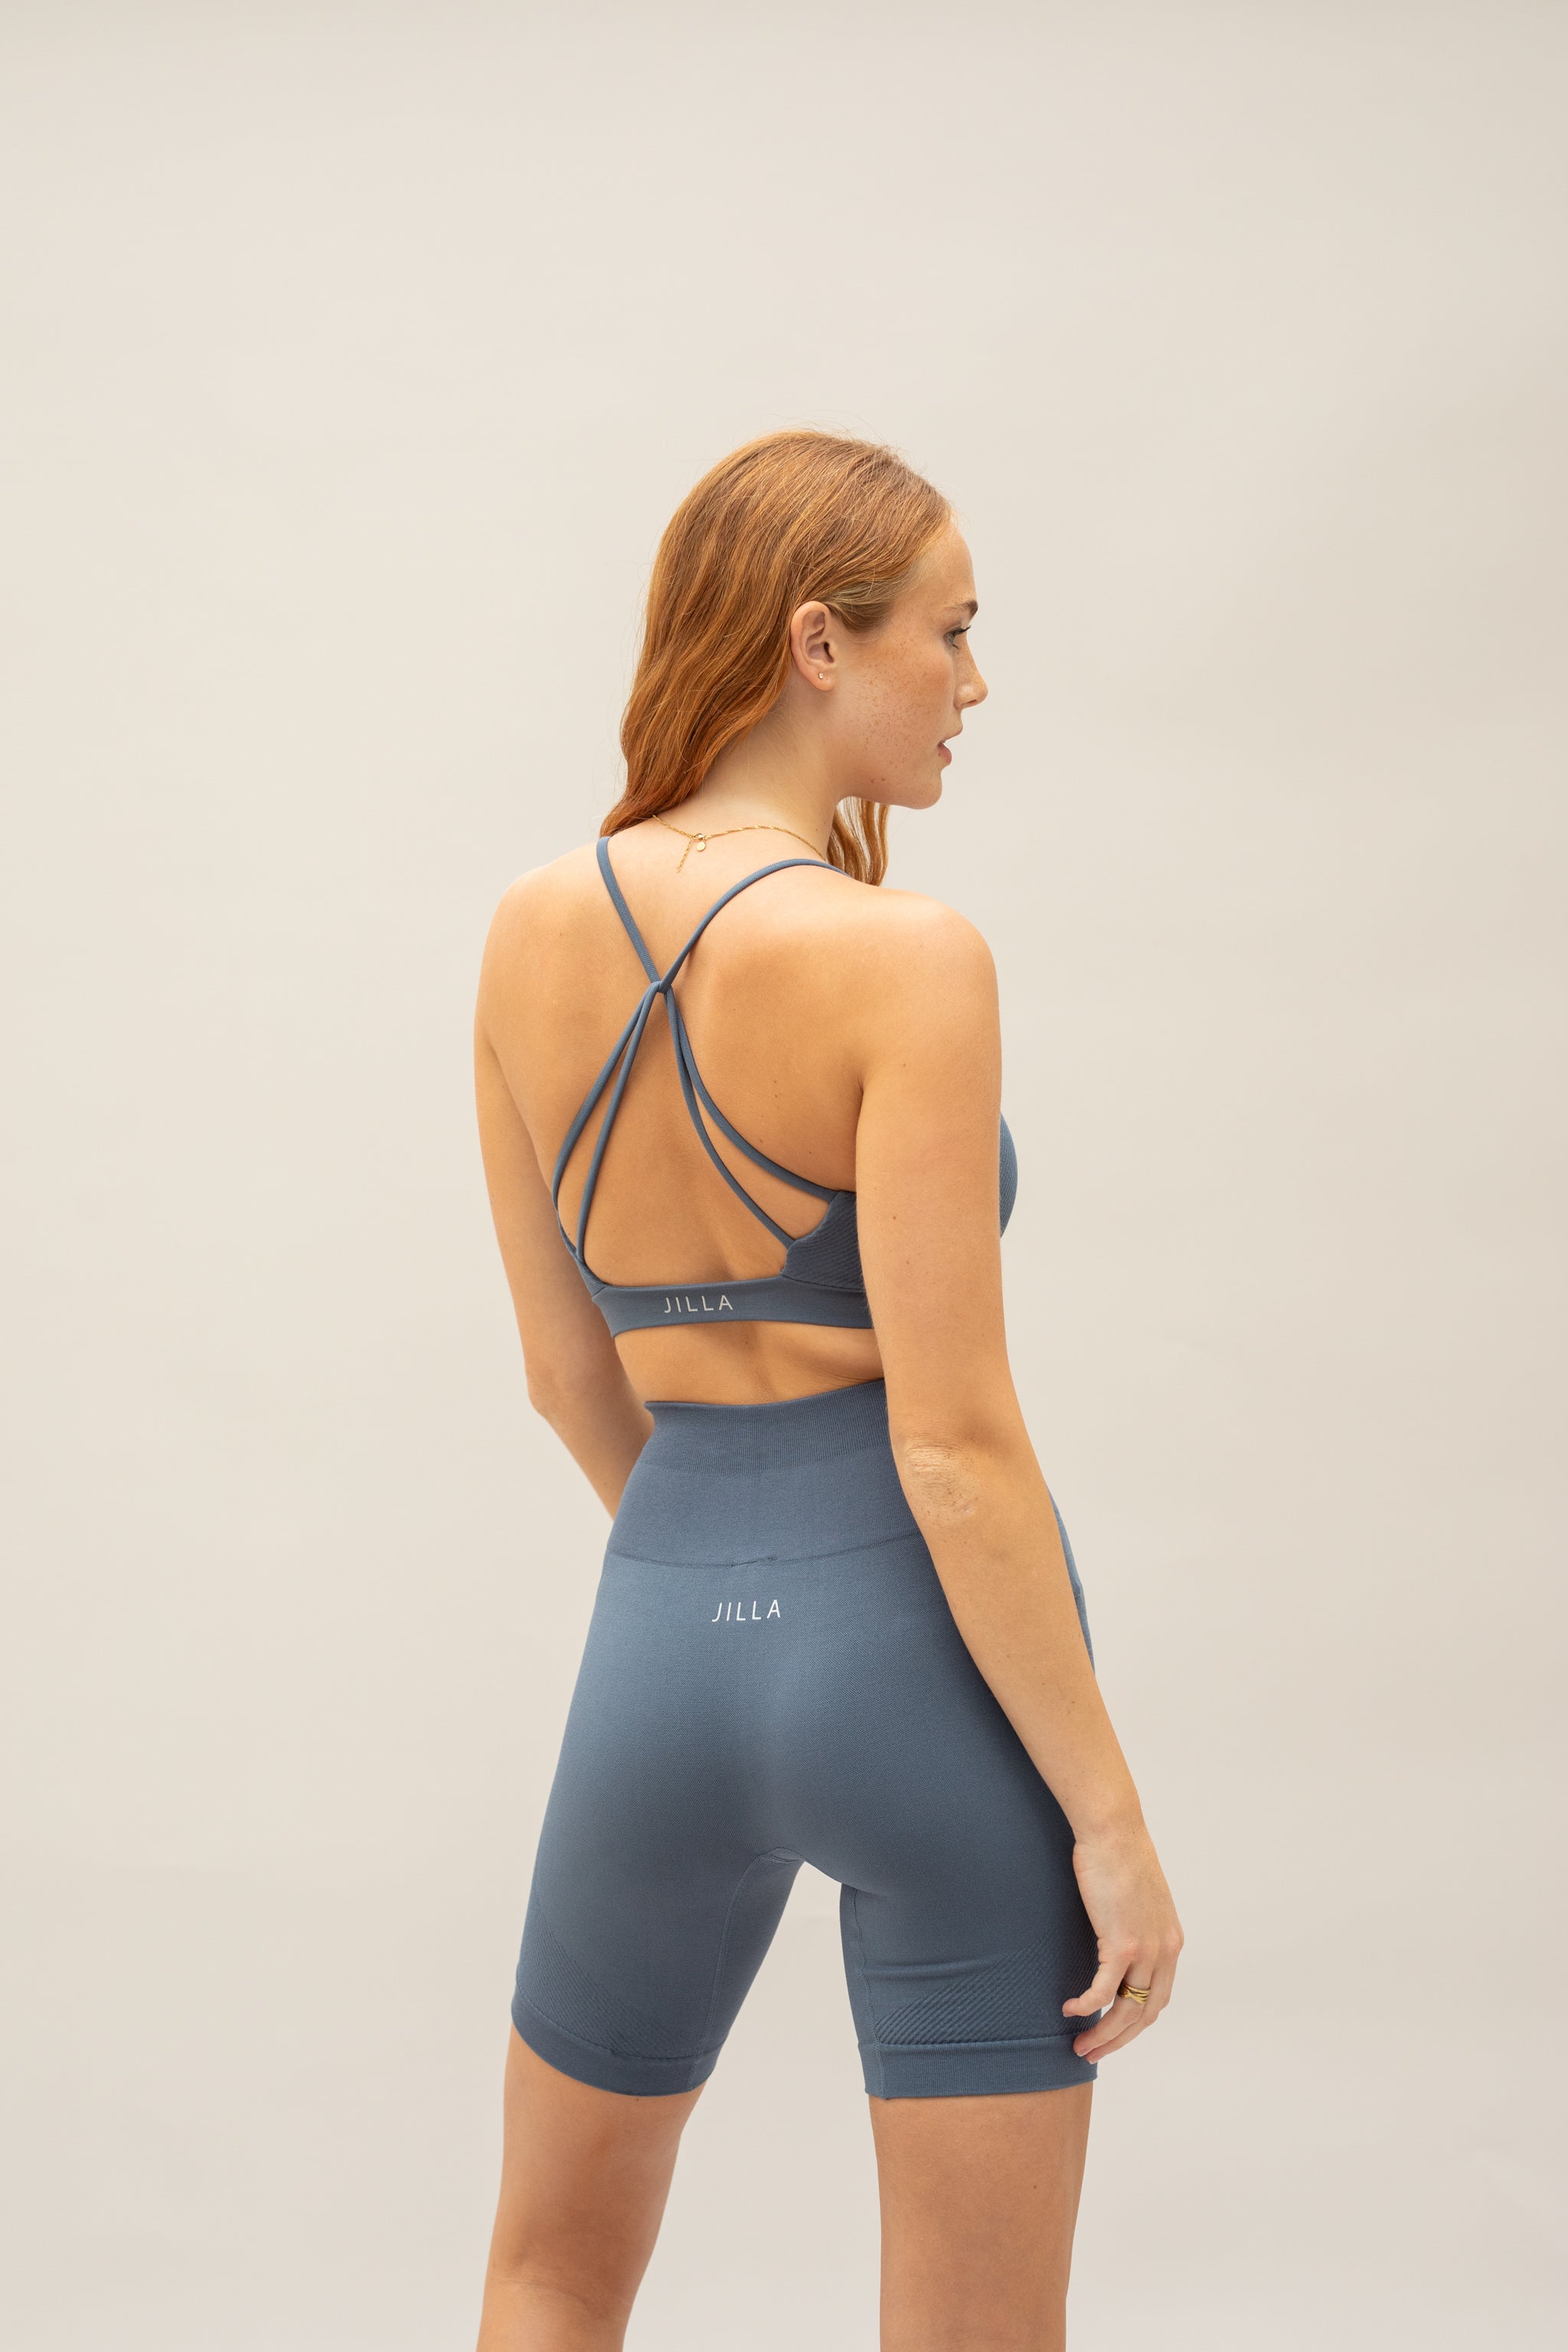 Model wearing steal blue shorts and steal blue supportive sports bra for sustainable activewear brand, Jilla.